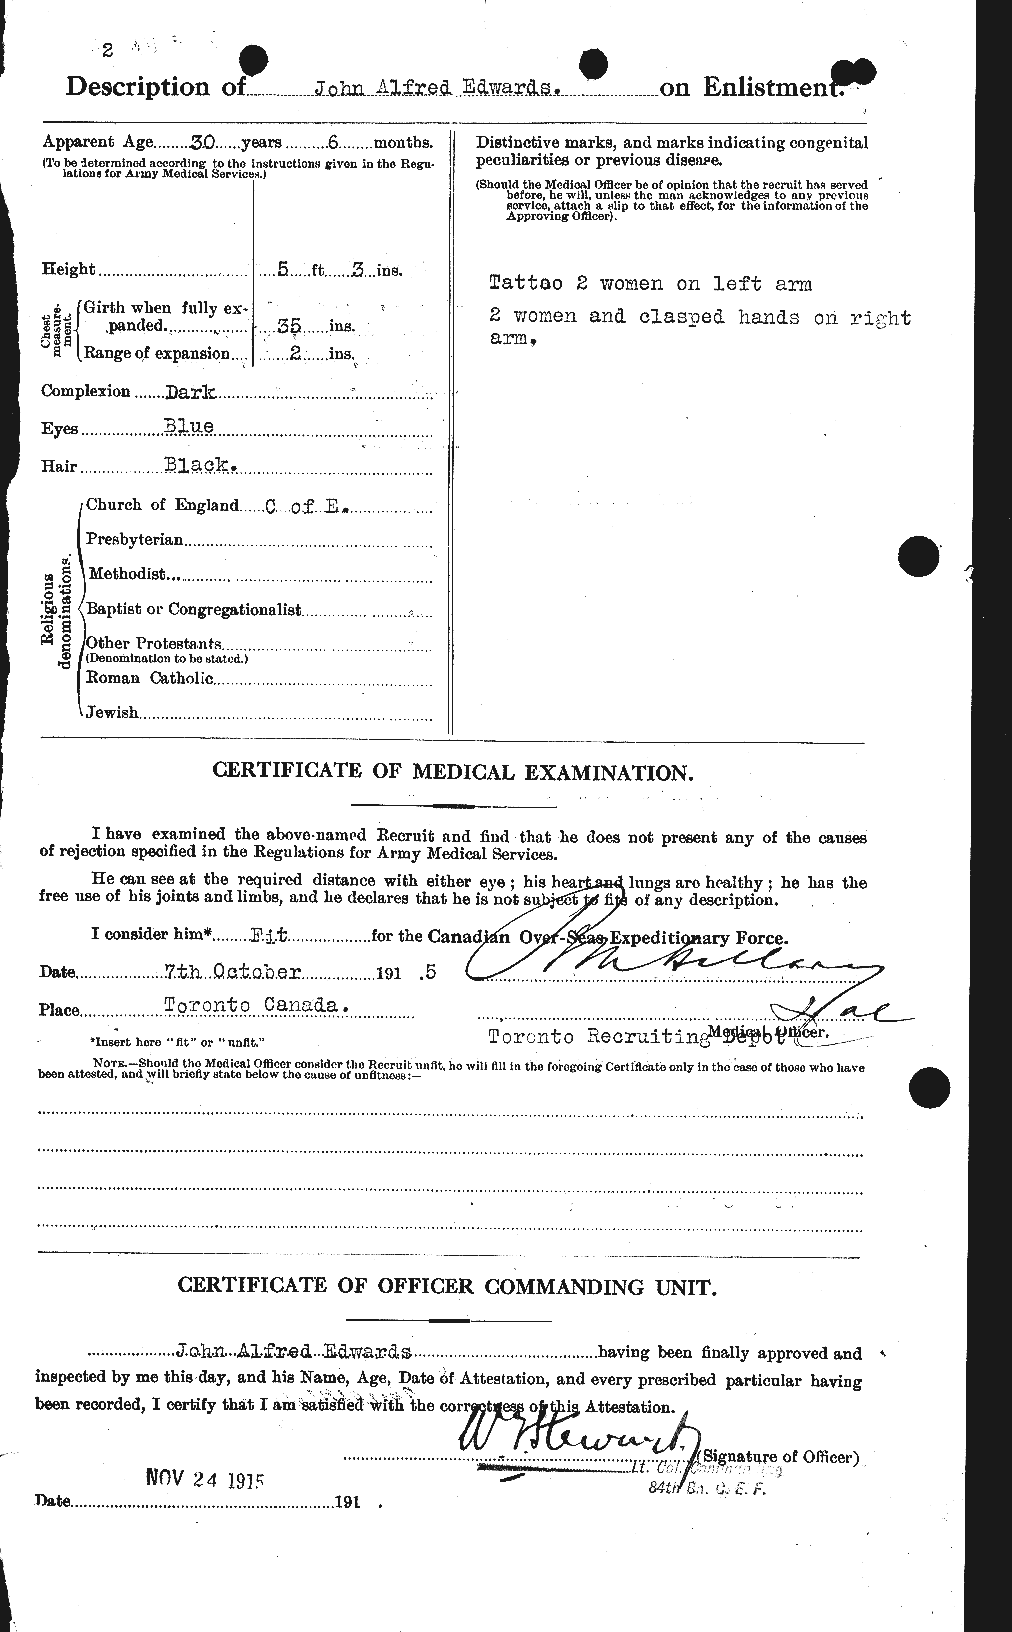 Personnel Records of the First World War - CEF 310119b